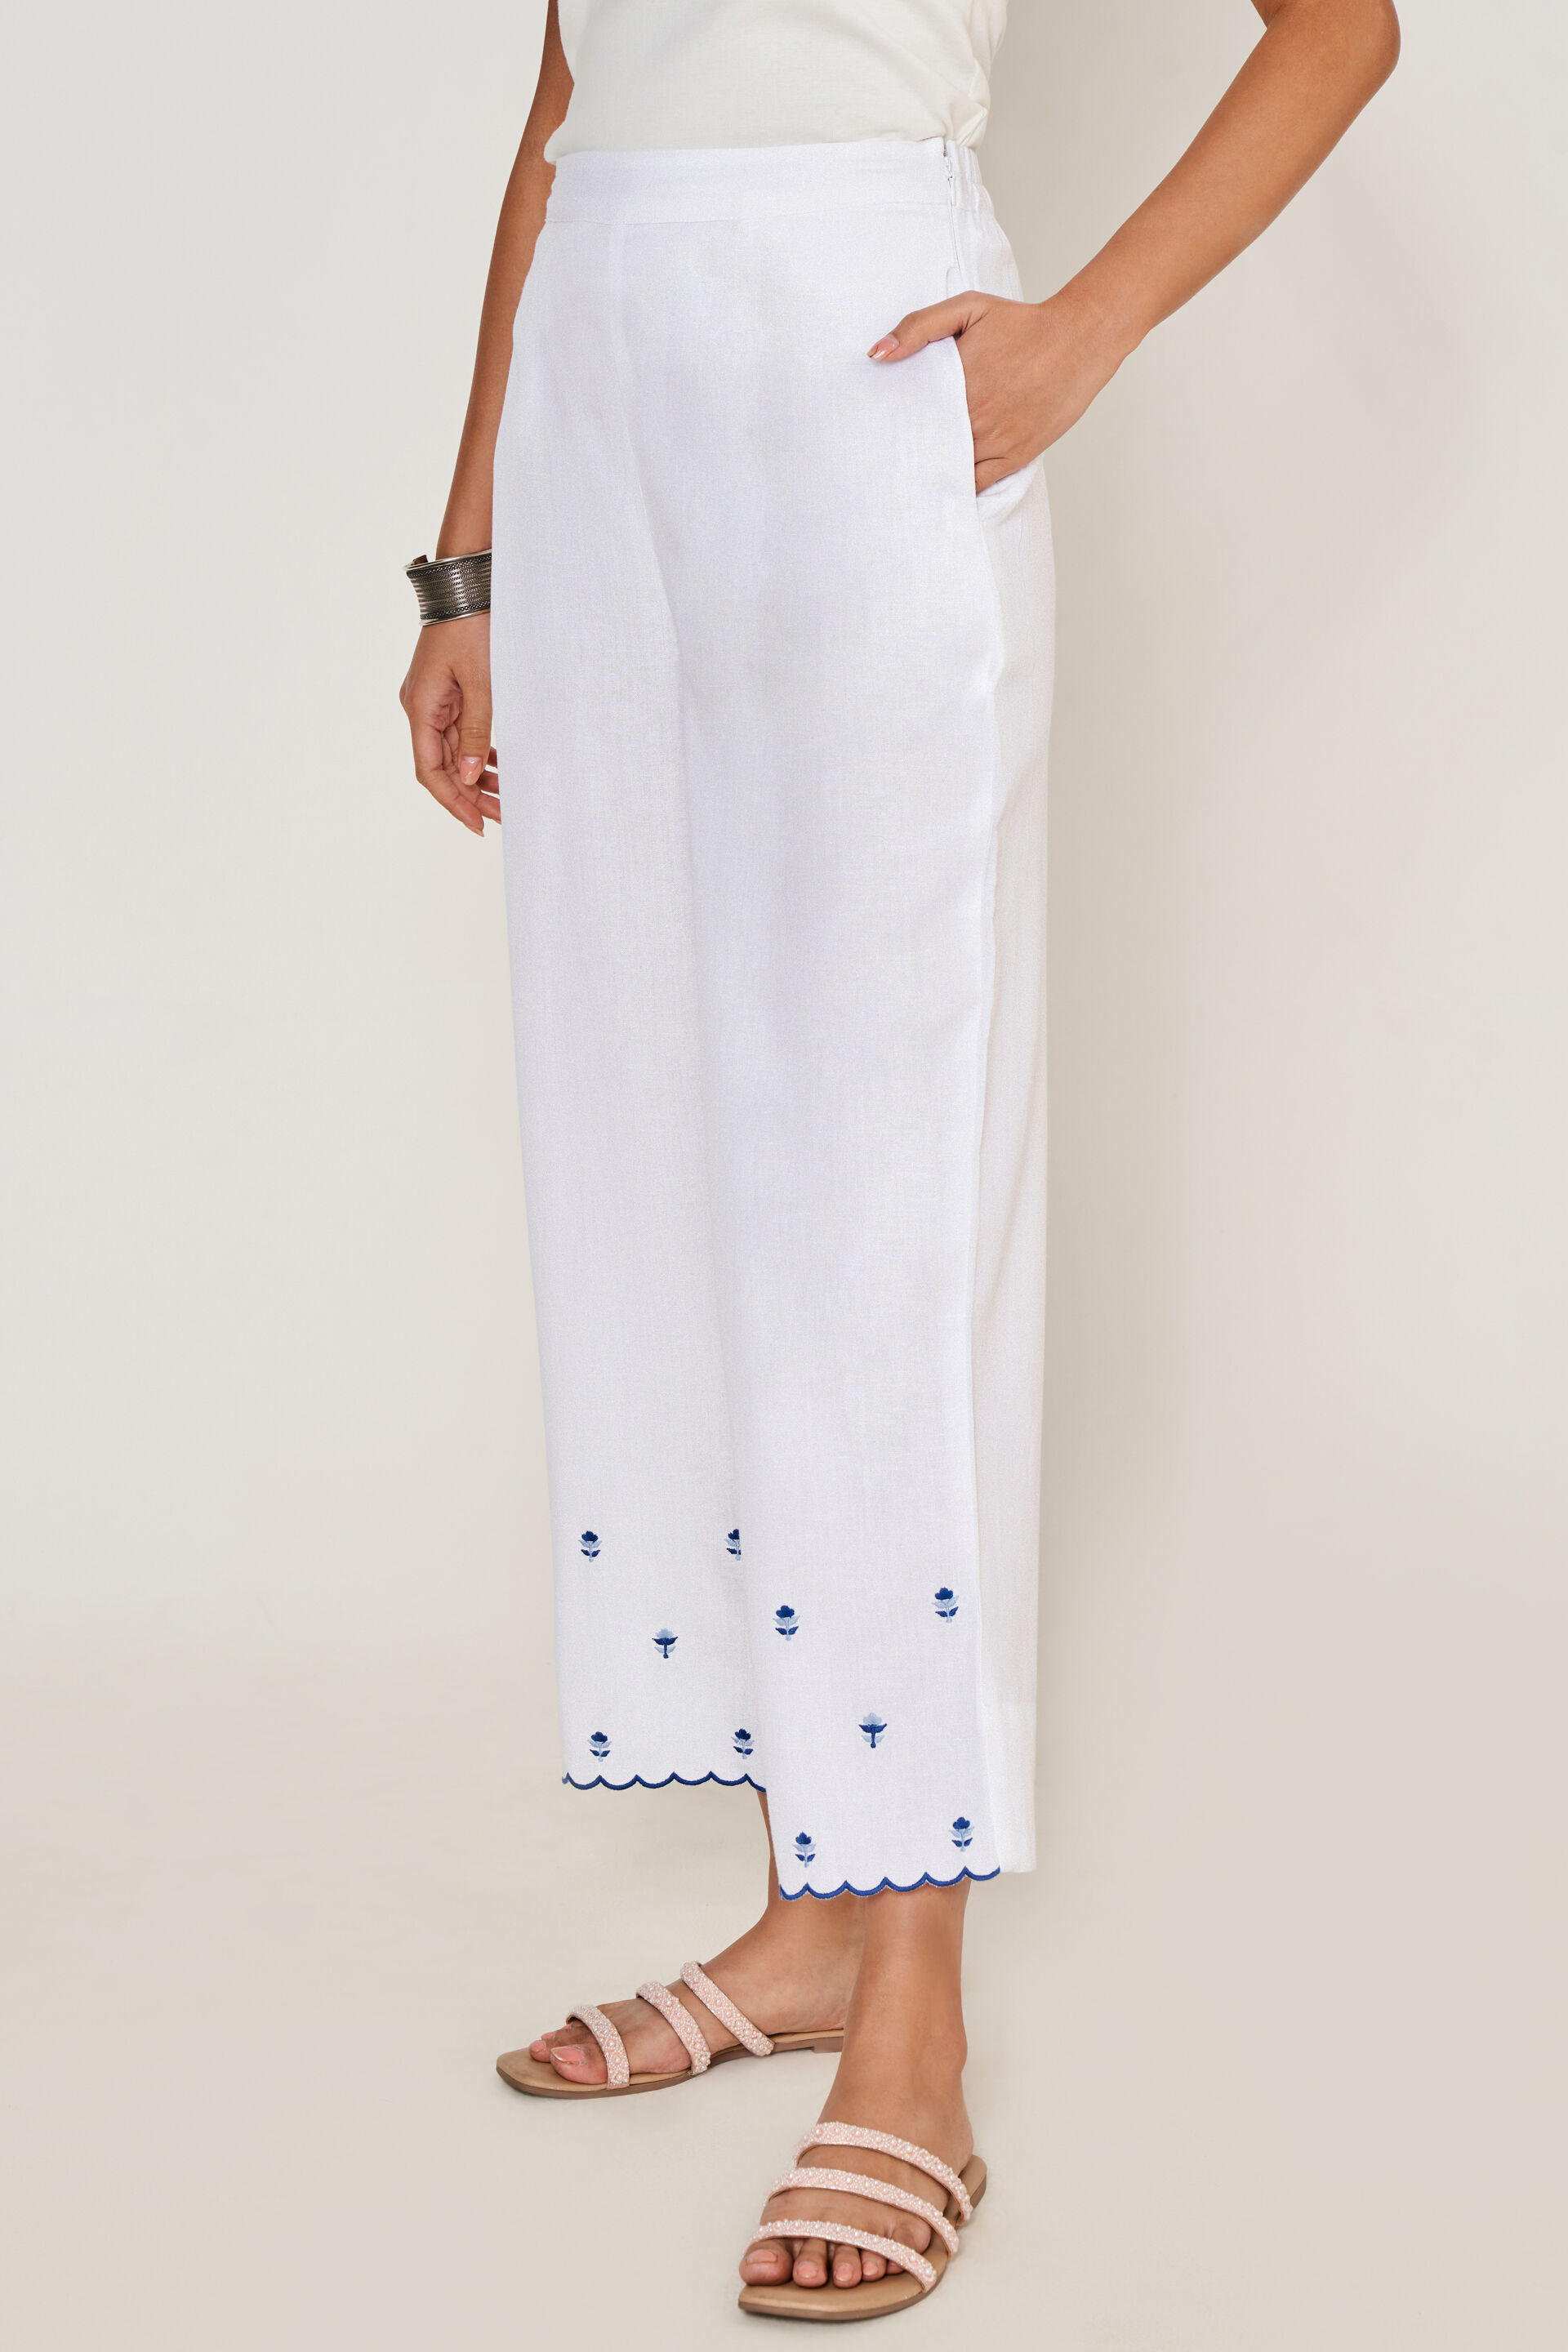 Buy White Pants for Women by ETHNICITY Online | Ajio.com